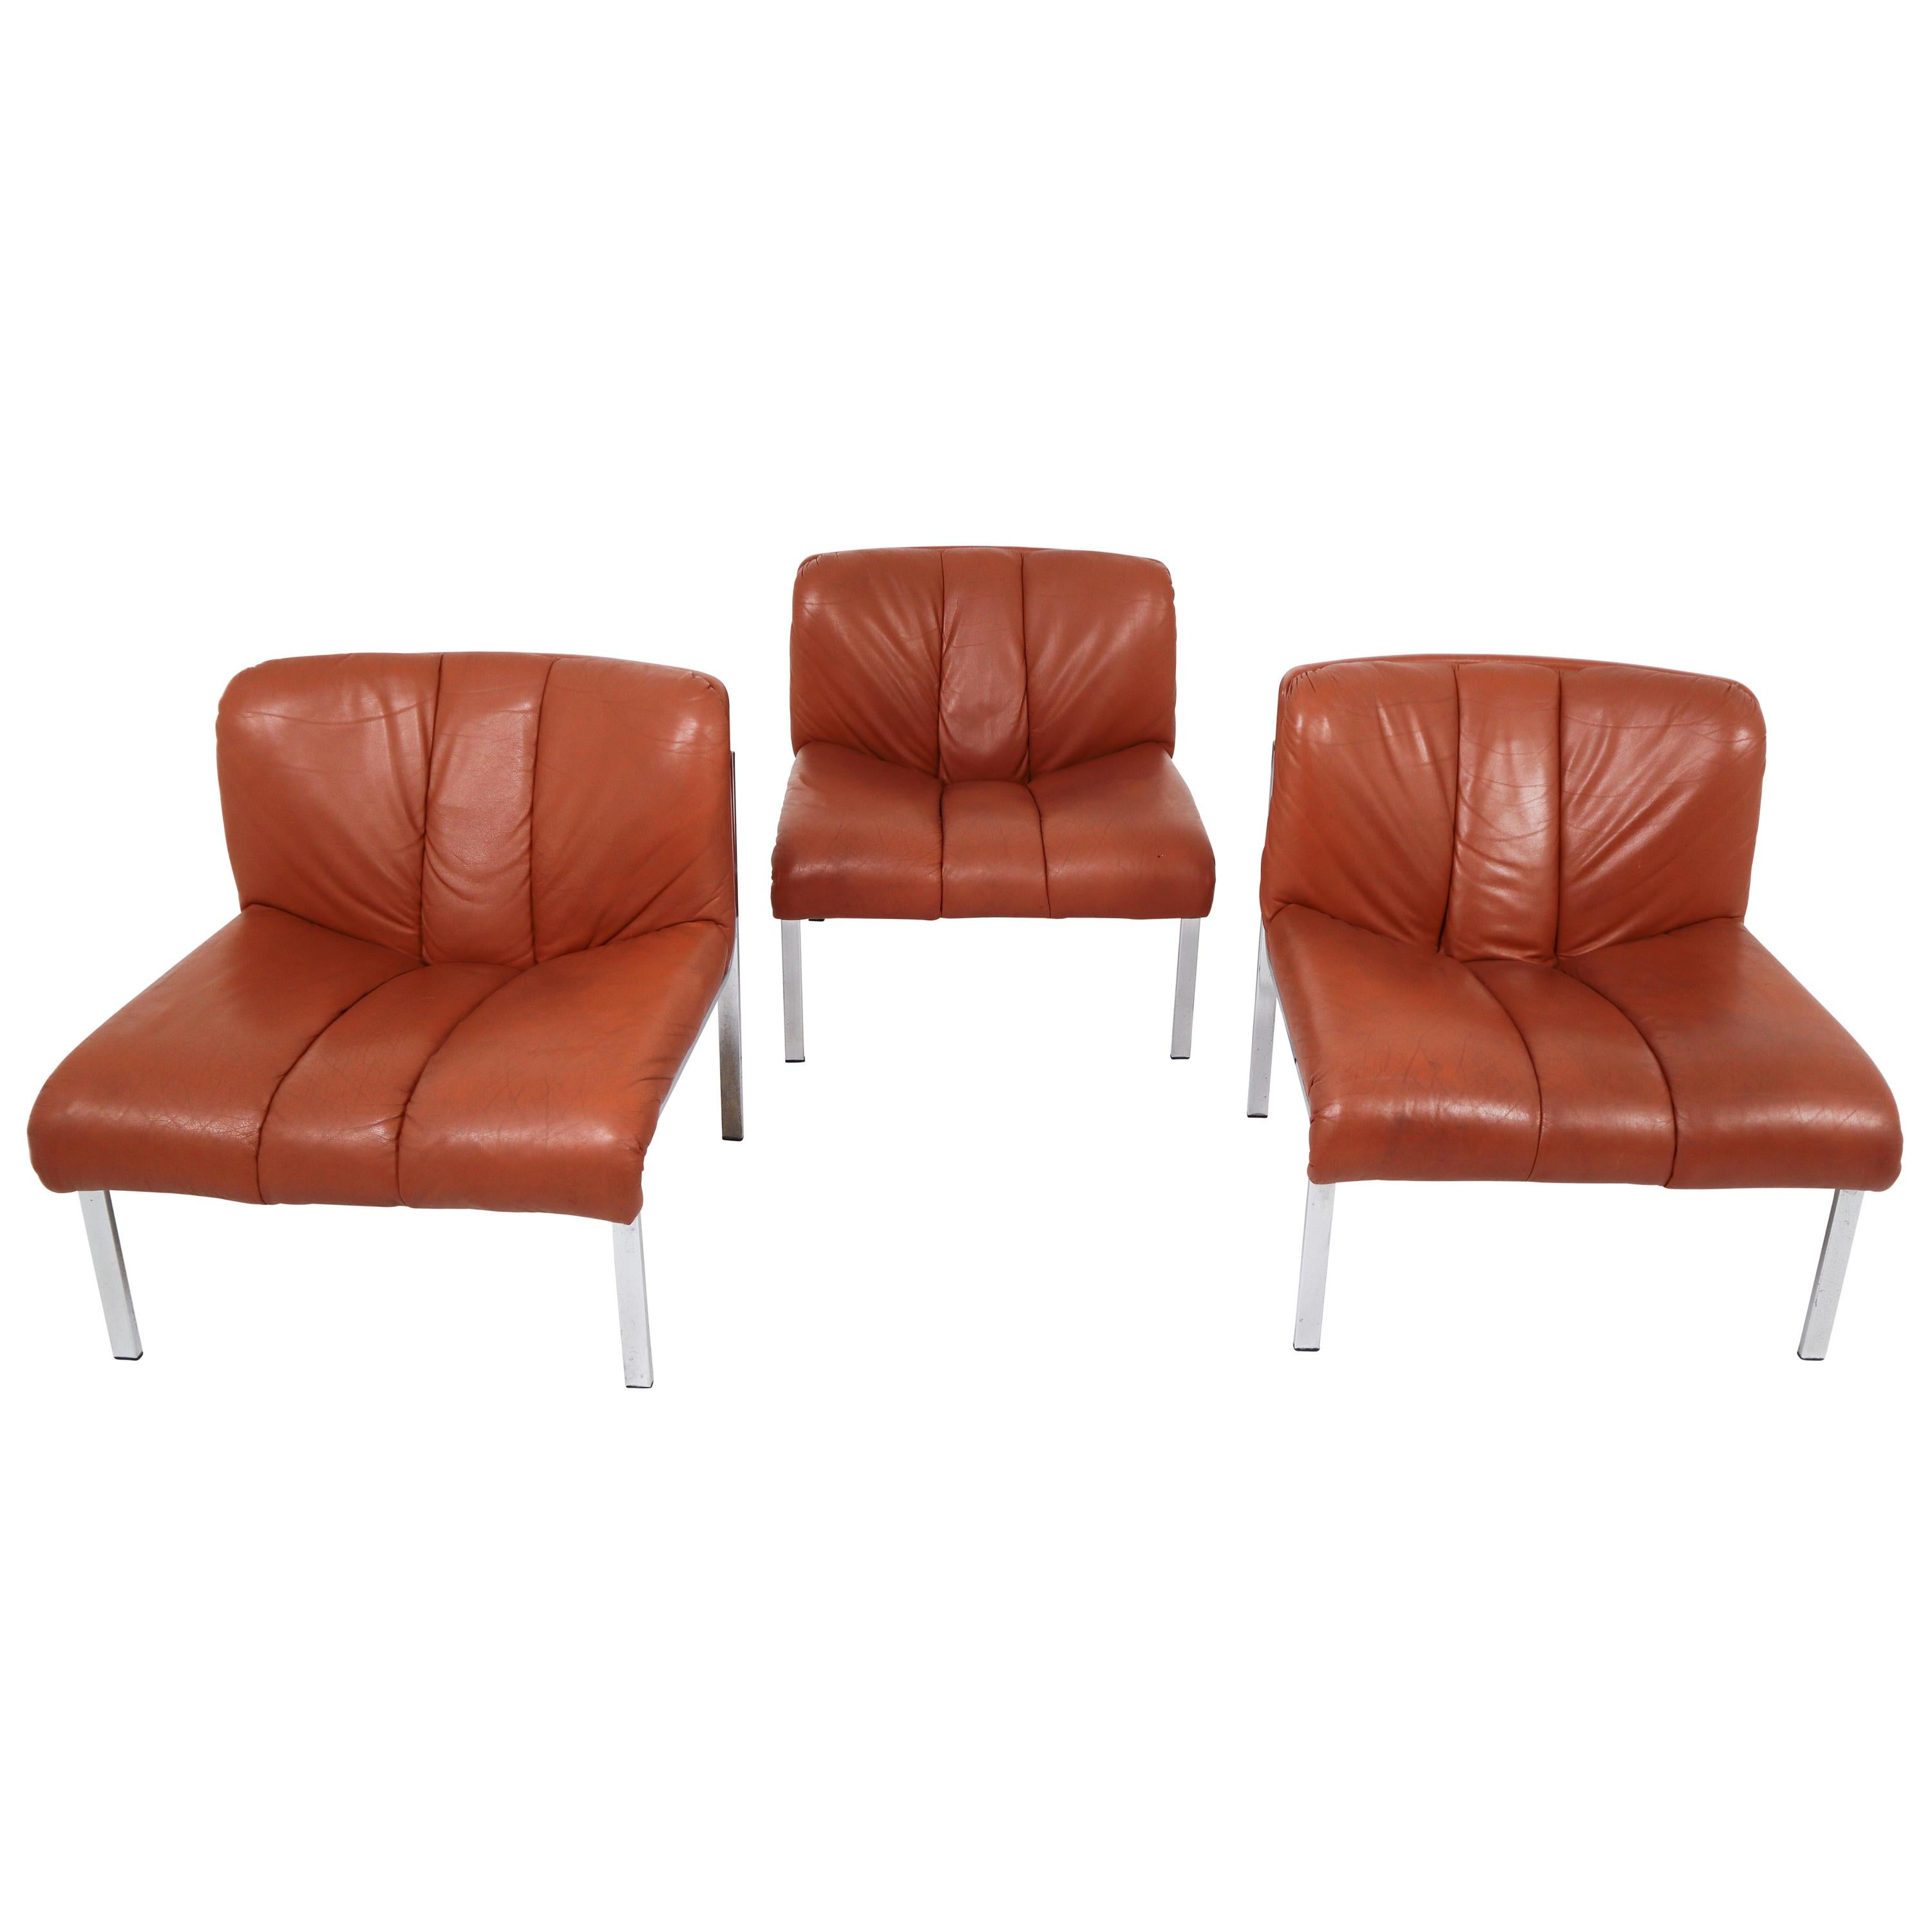 Set of Three Chairs, Sofa in Cognac Leather by Girsberger, Switzerland, 1970s